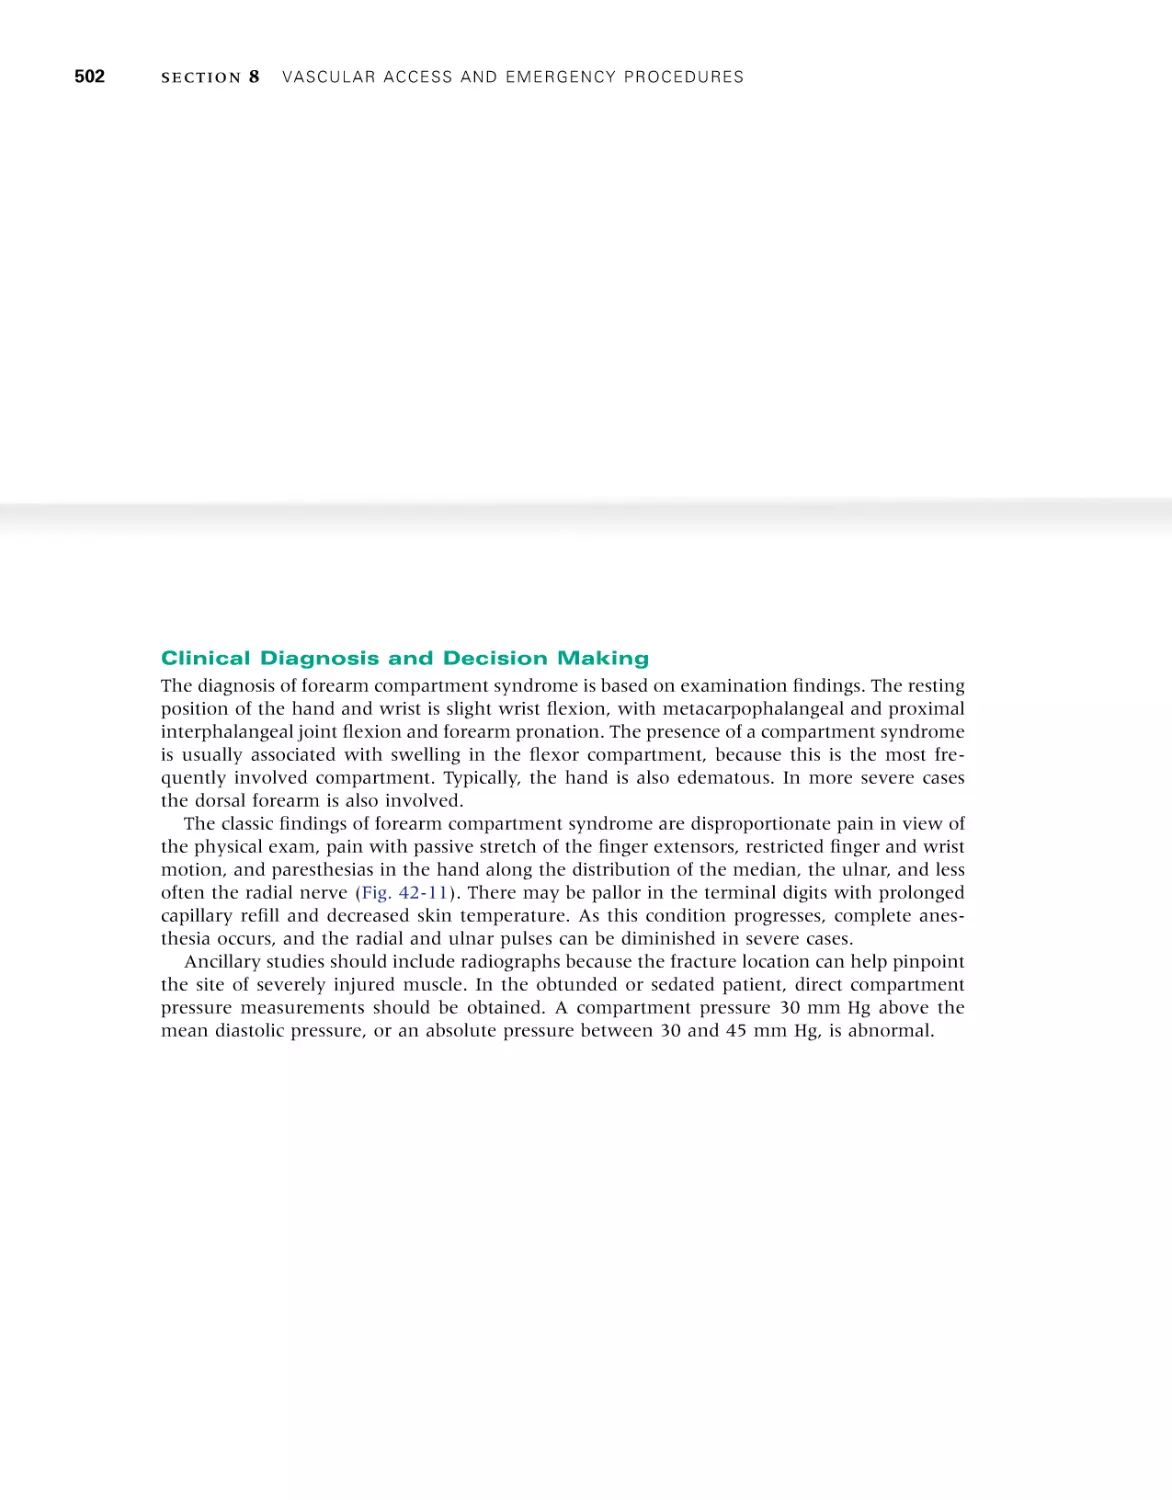 Clinical Diagnosis and Decision Making